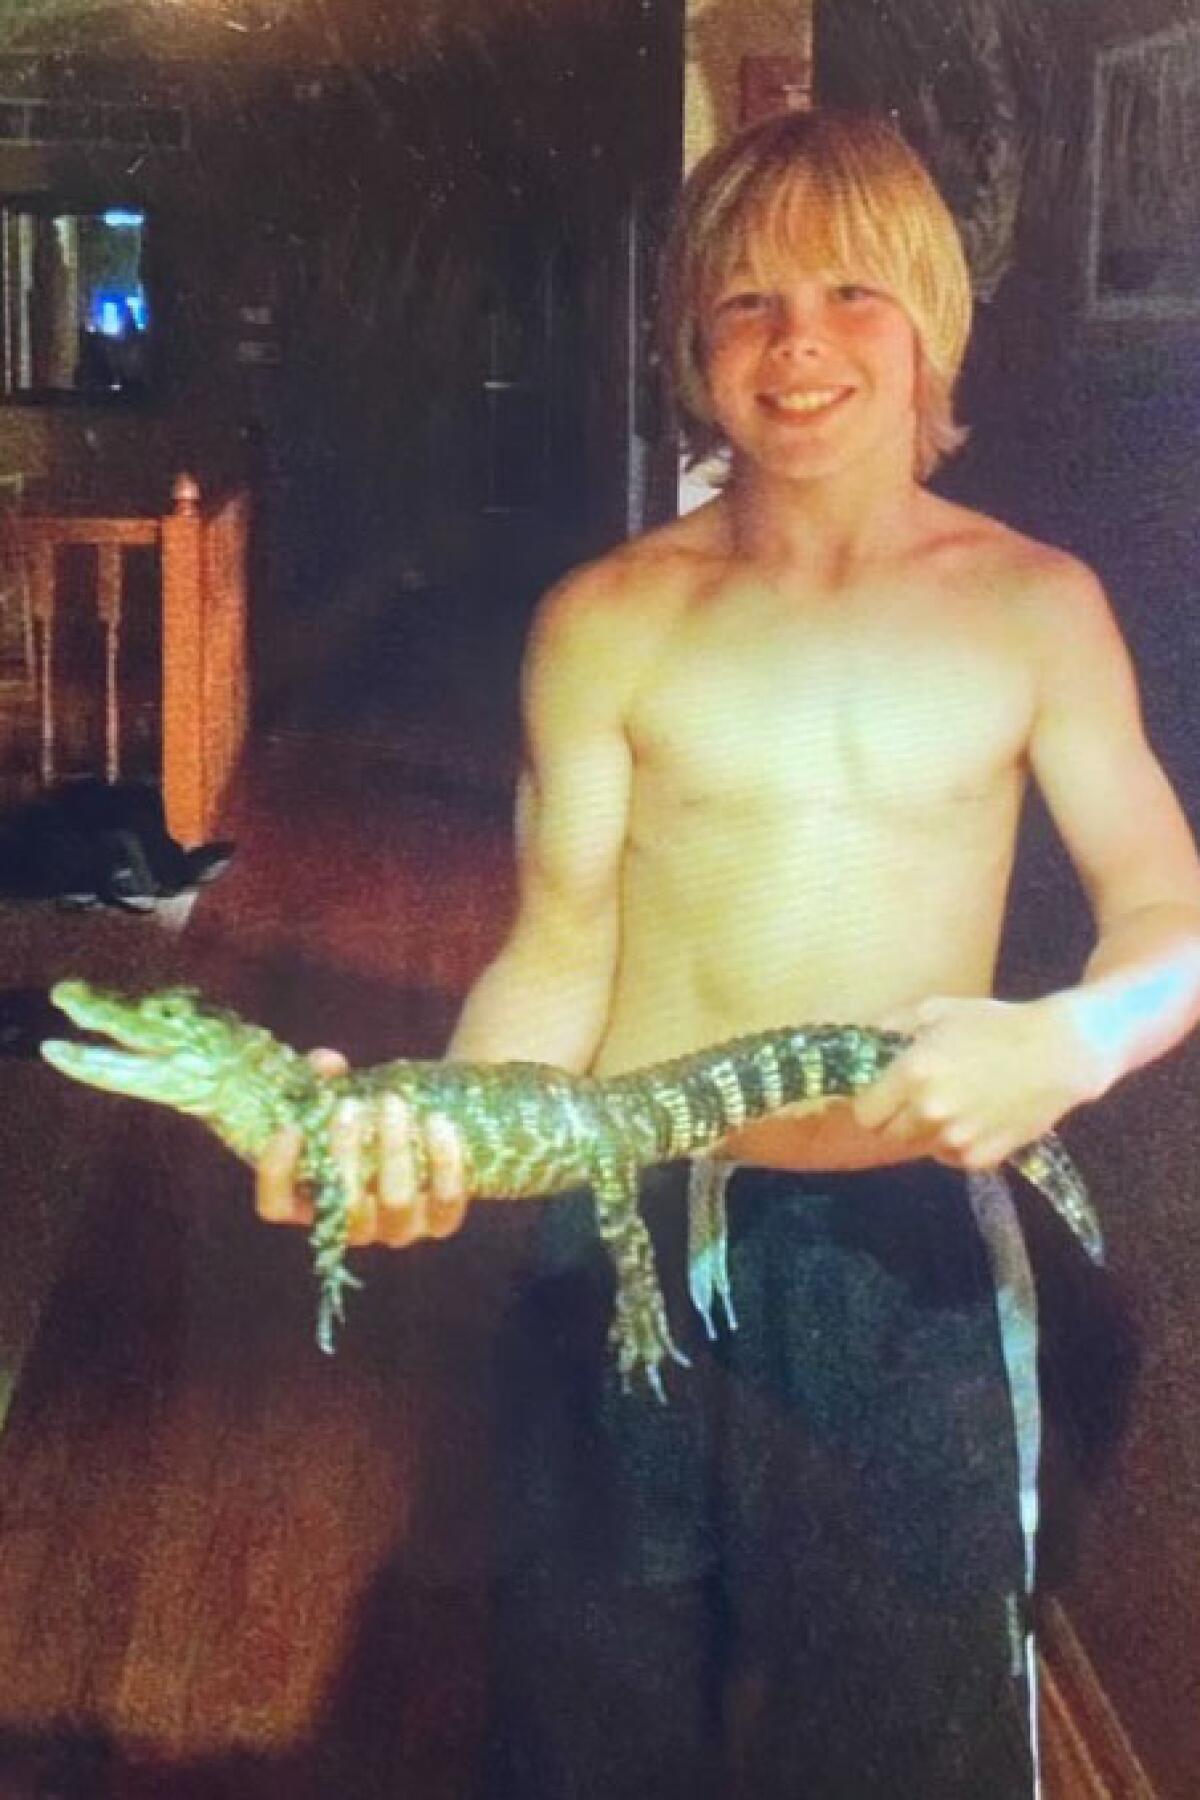 Carson Steele holds Crocky-J in an undated photo.